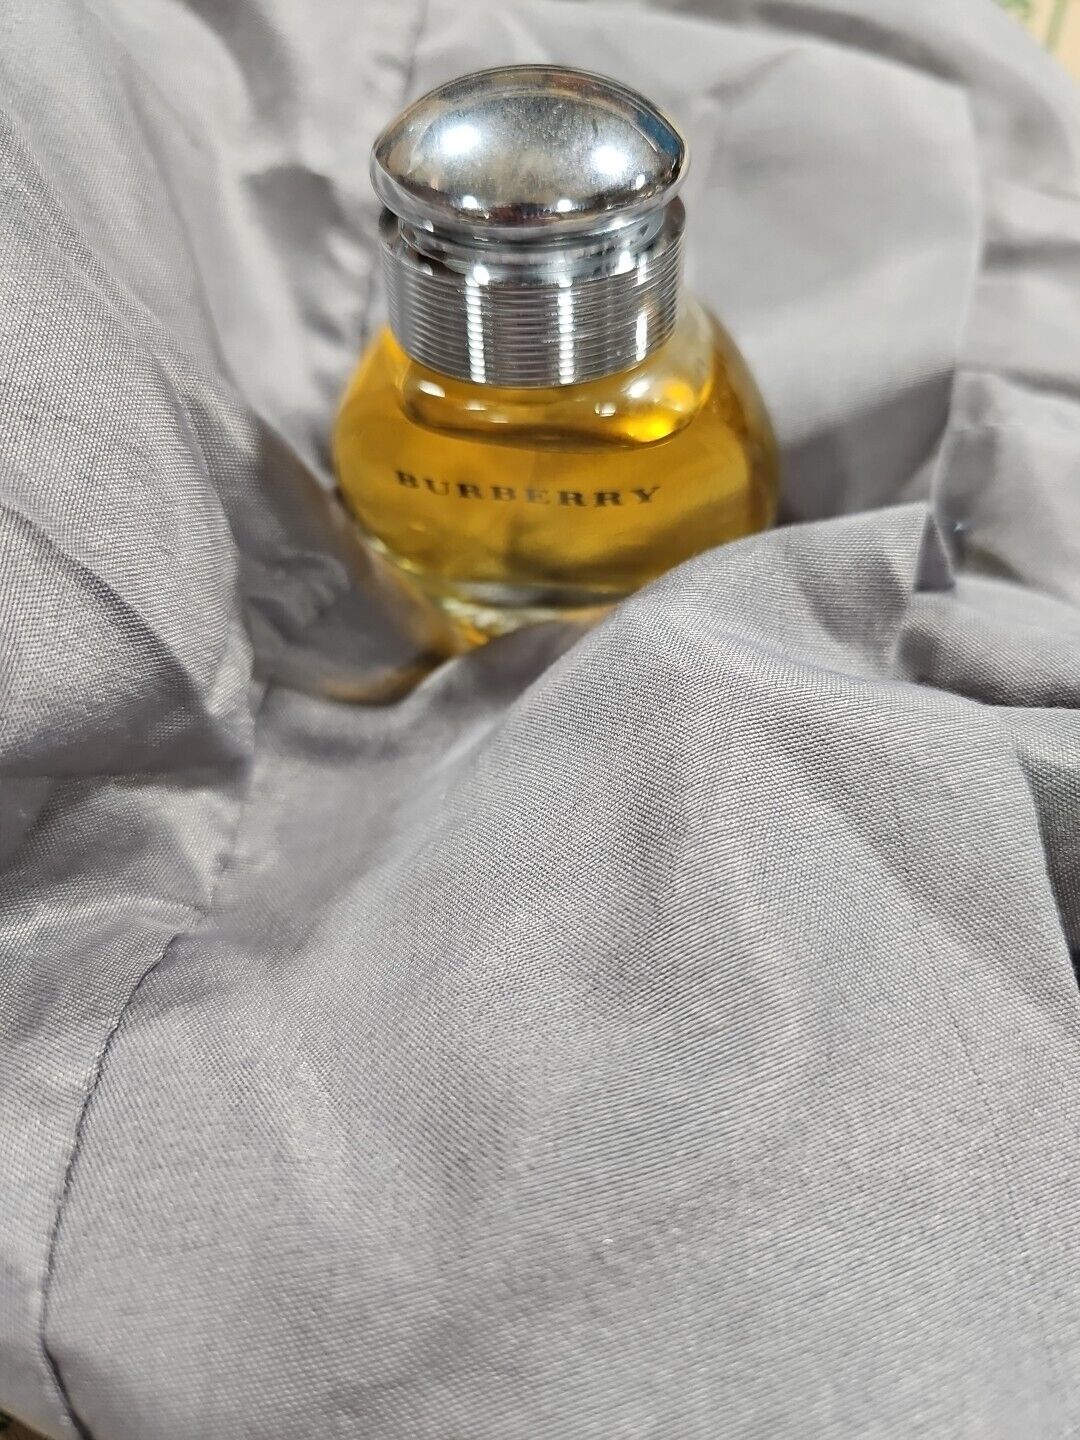 Burberry London Made In France 1Fl OZ Perfume-Partial Bottle NEARLY FULL